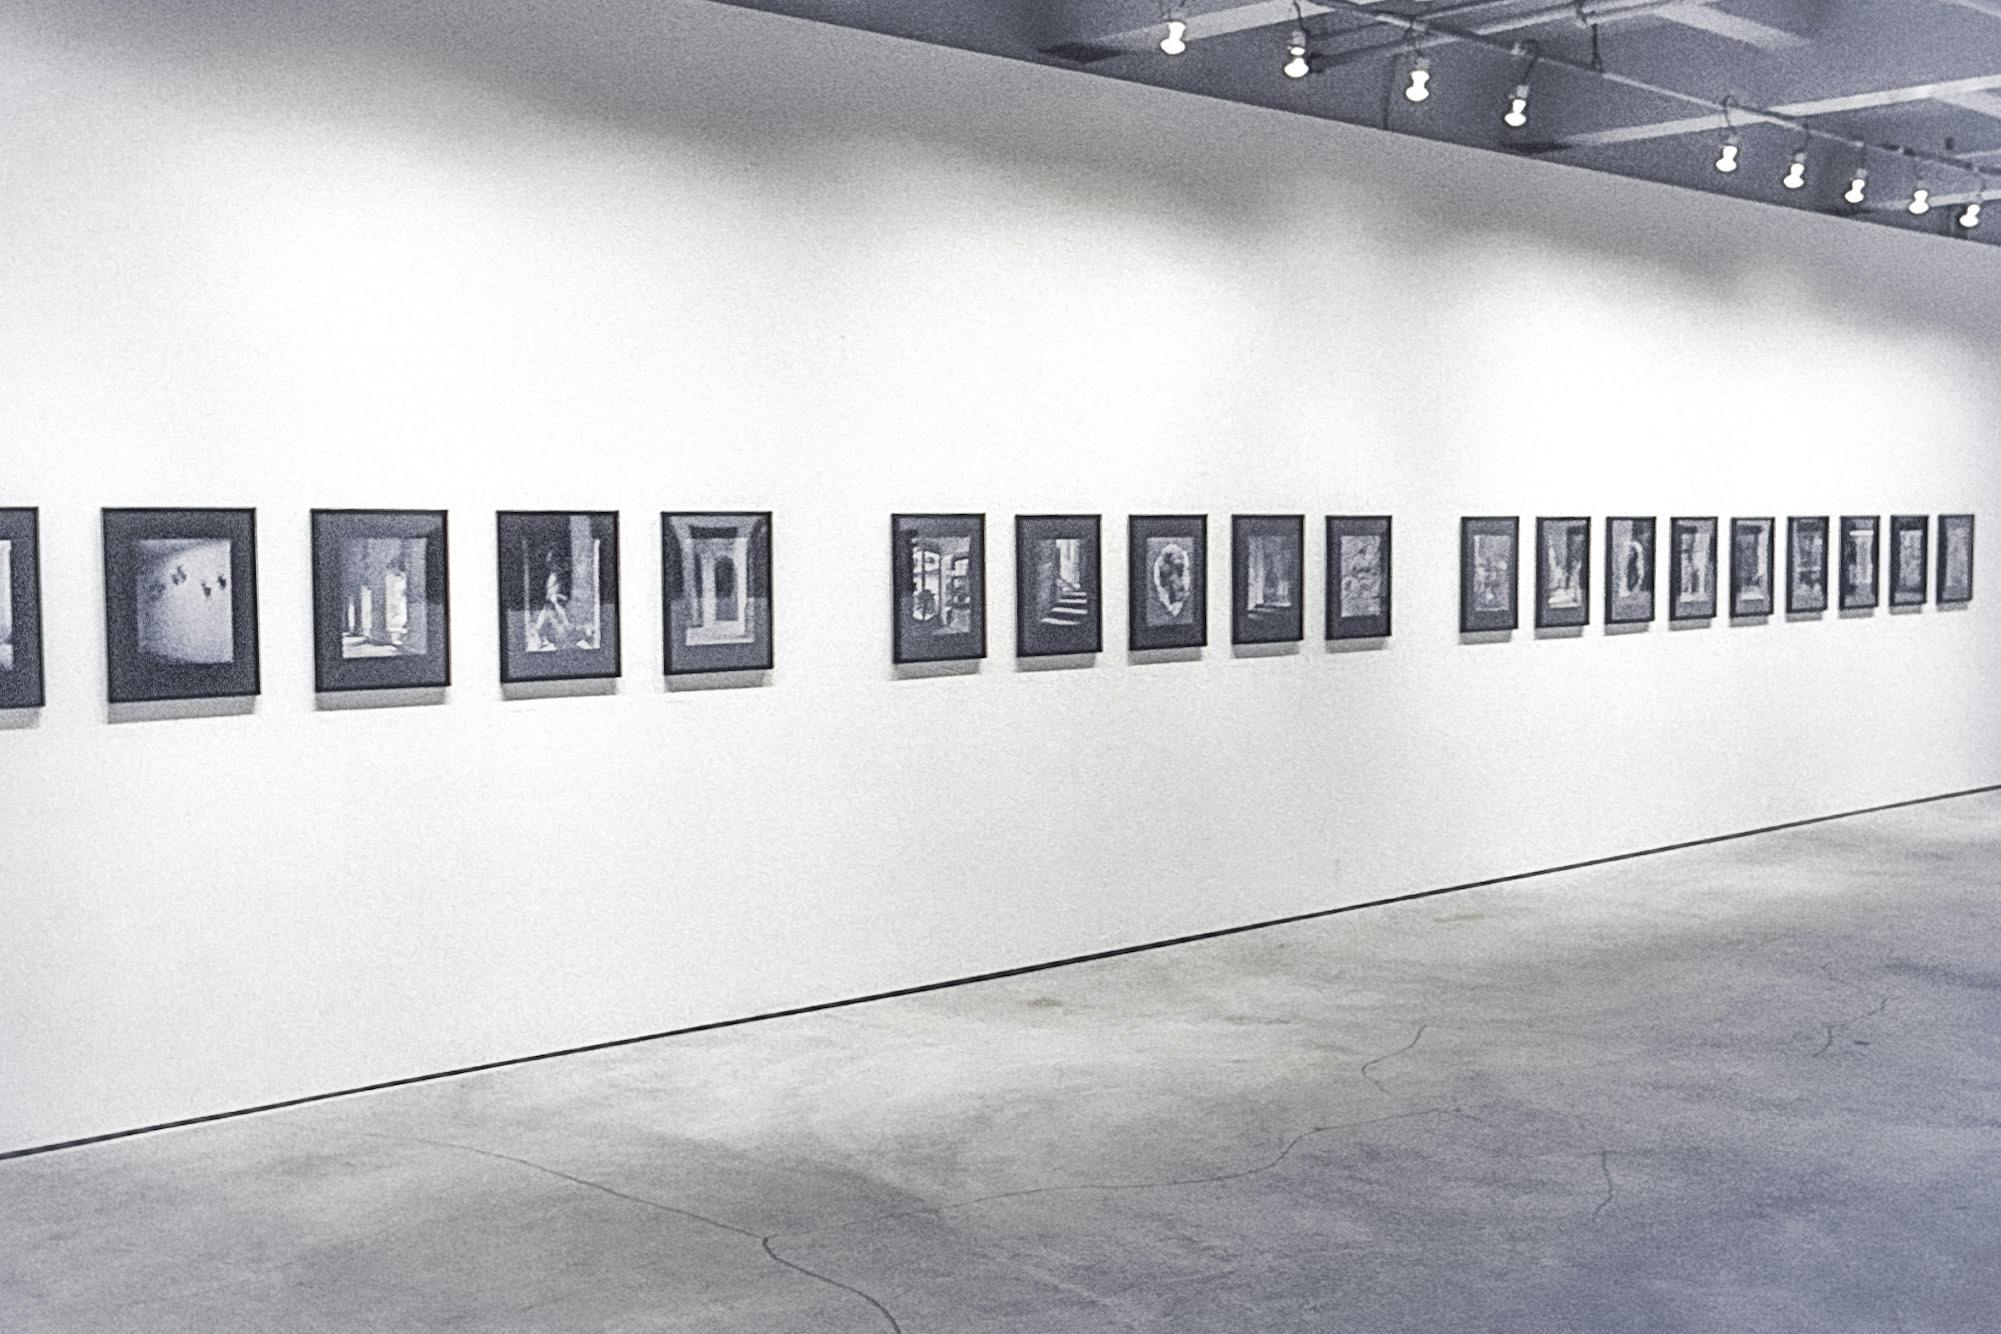 Three separate groups of photos in black frames. The photos are all black and white and show doorways, stairs, and windows. A total of 19 photos are visible in the space.